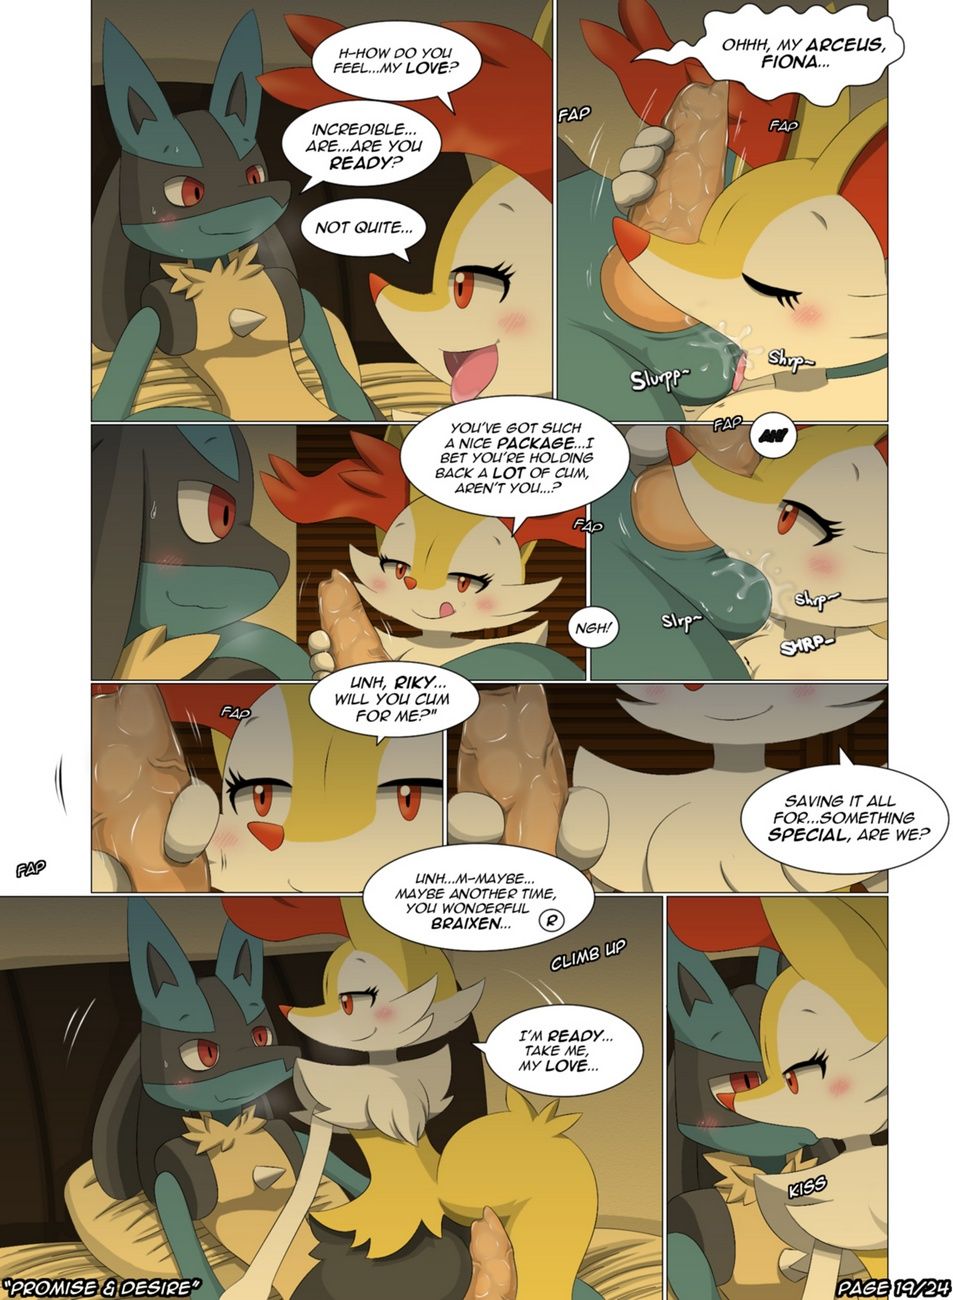 Promise & Desire page 20